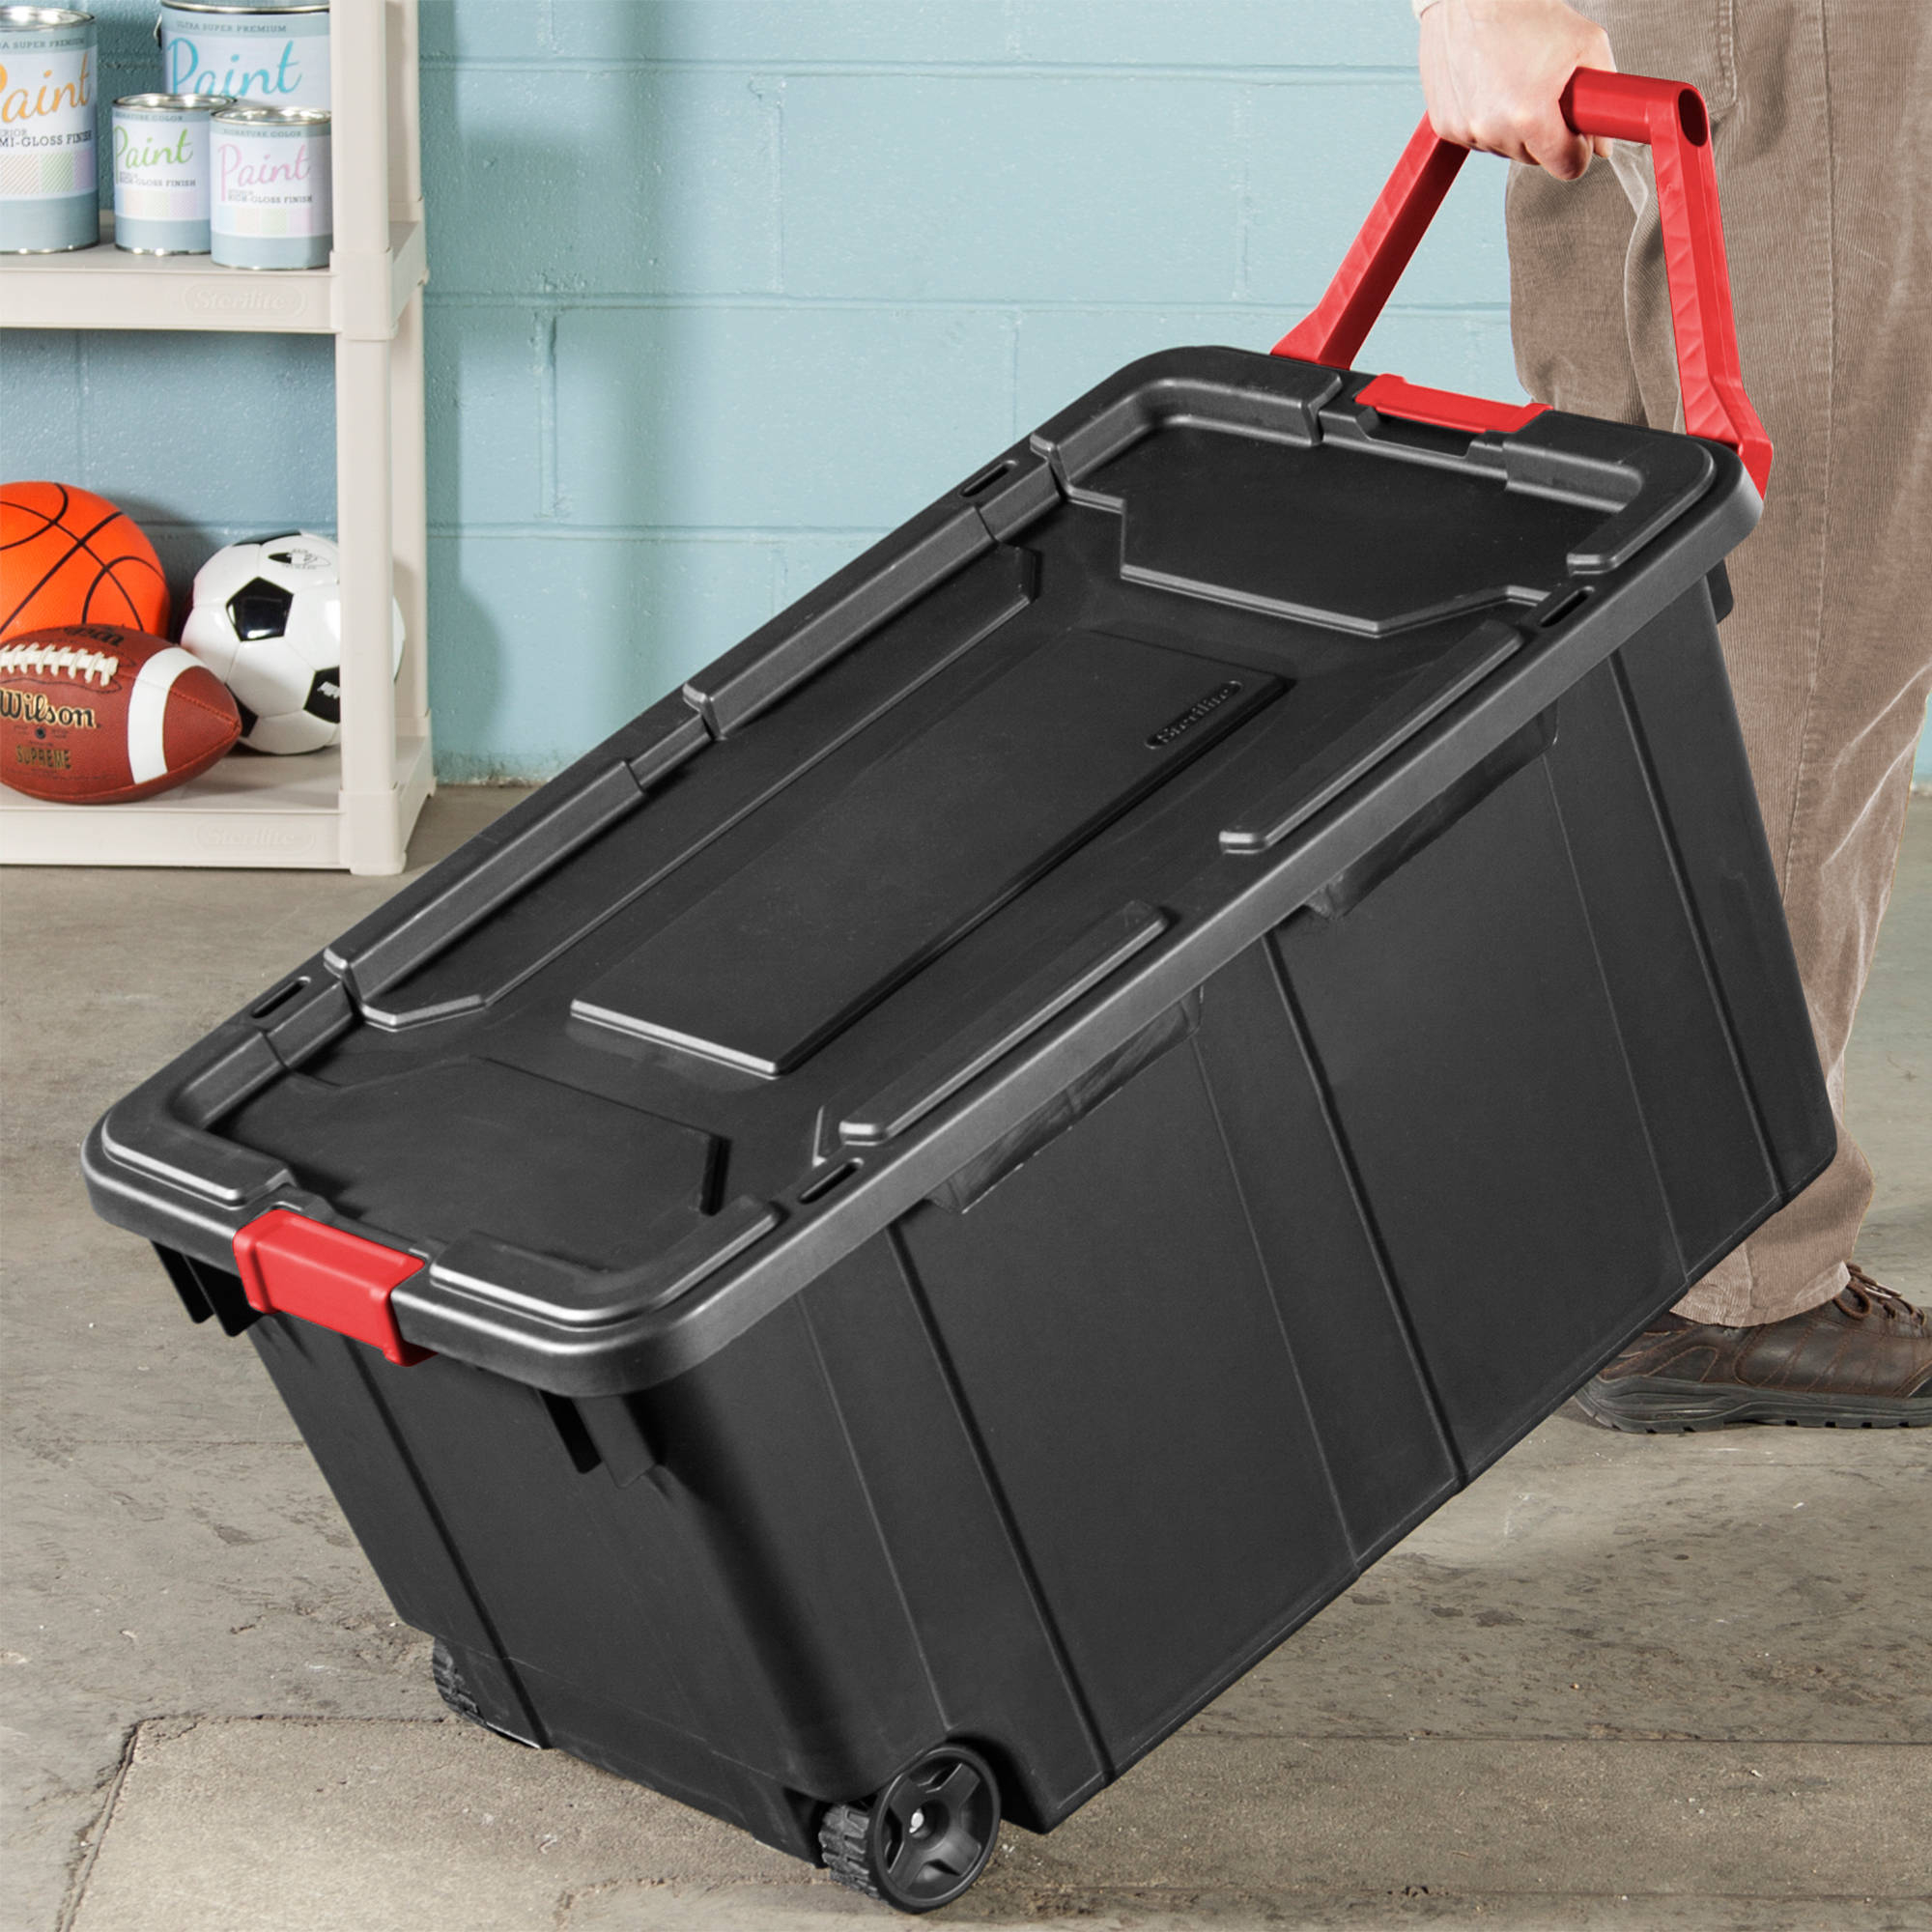 Plastic Storage Container With Wheels And Handle Storage Ideas for dimensions 2000 X 2000